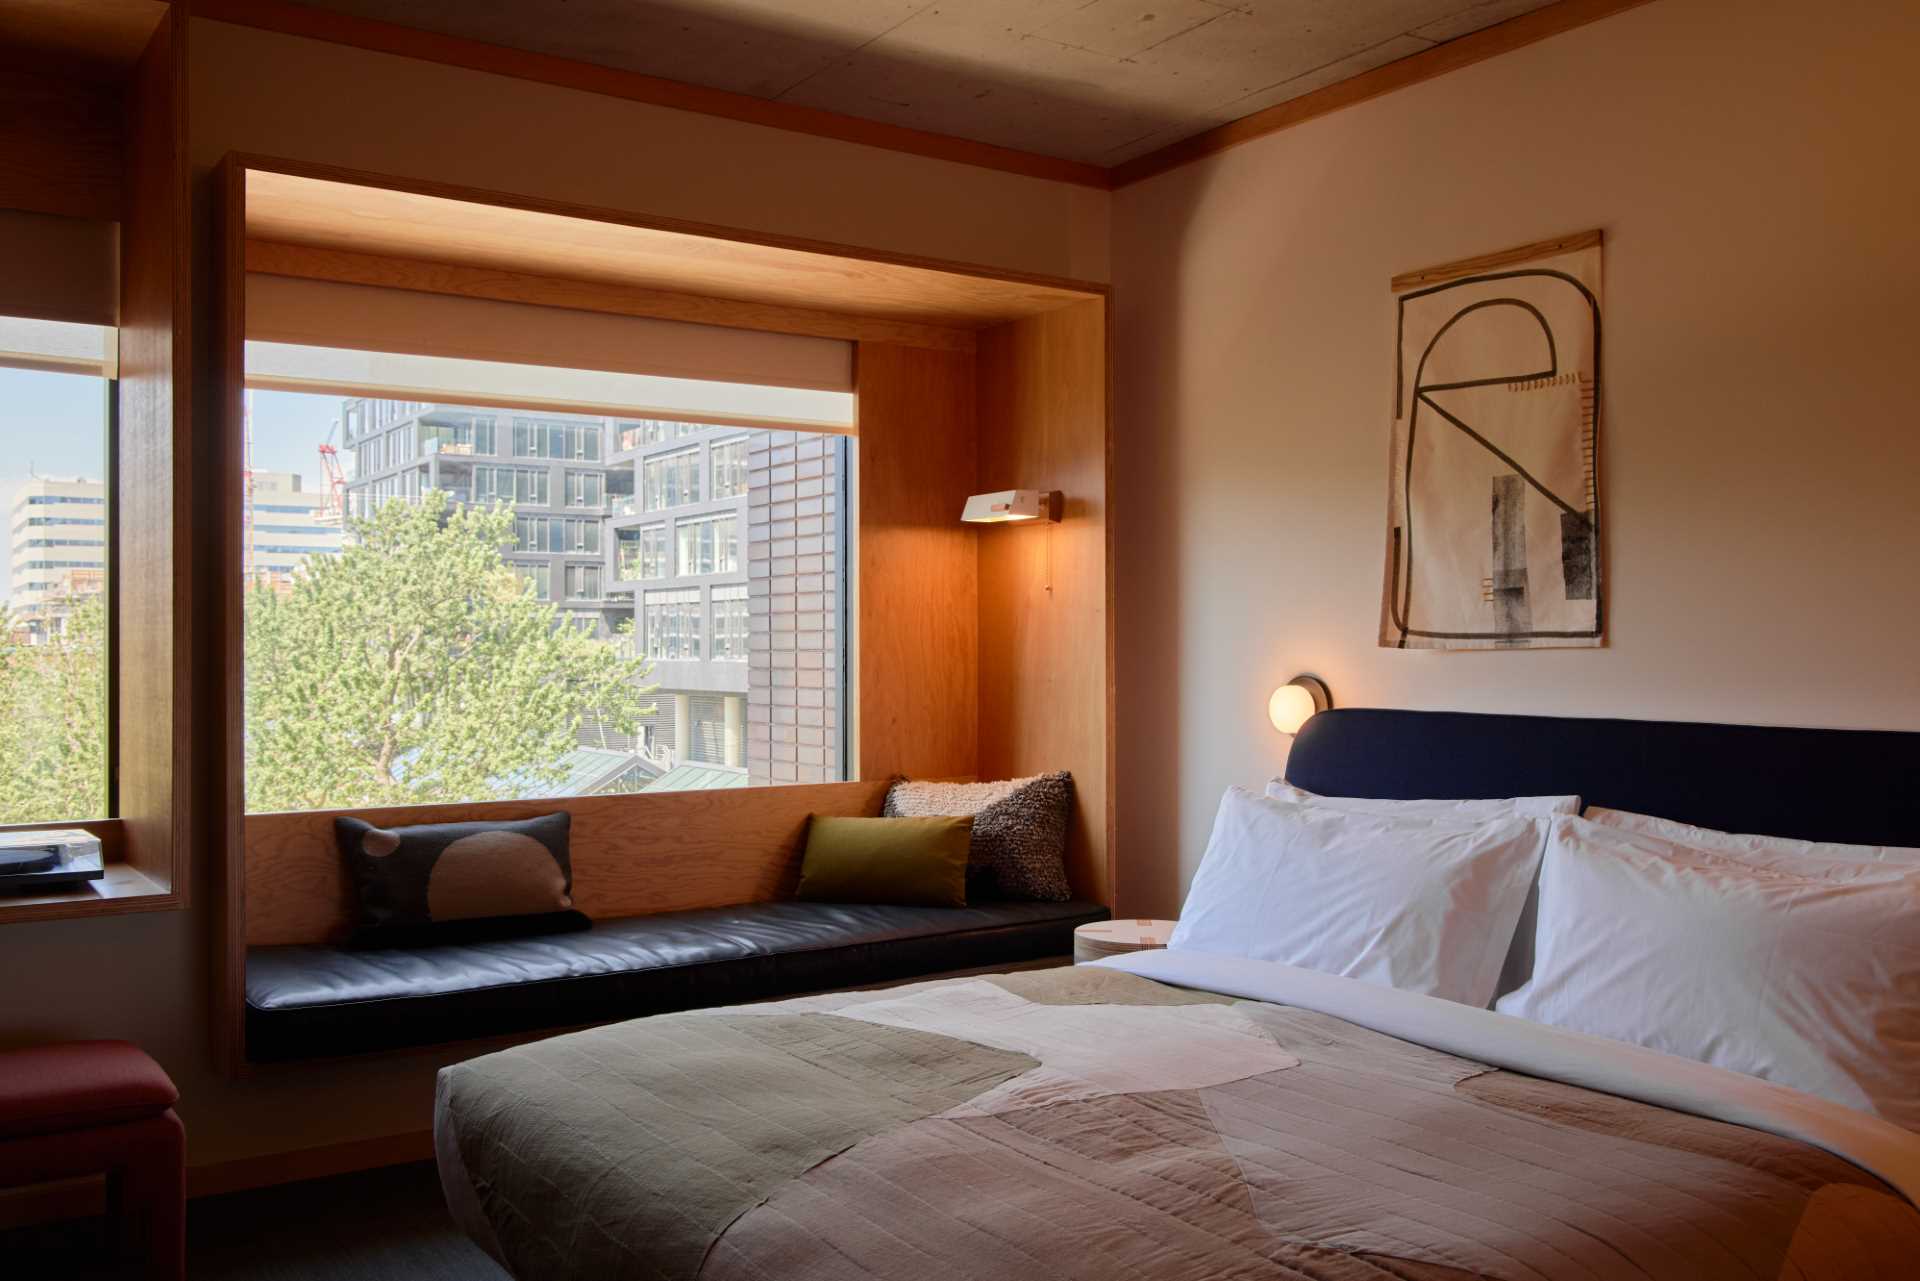 This modern hotel room includes a built-in window bench provides a place to enjoy the tree and city views.